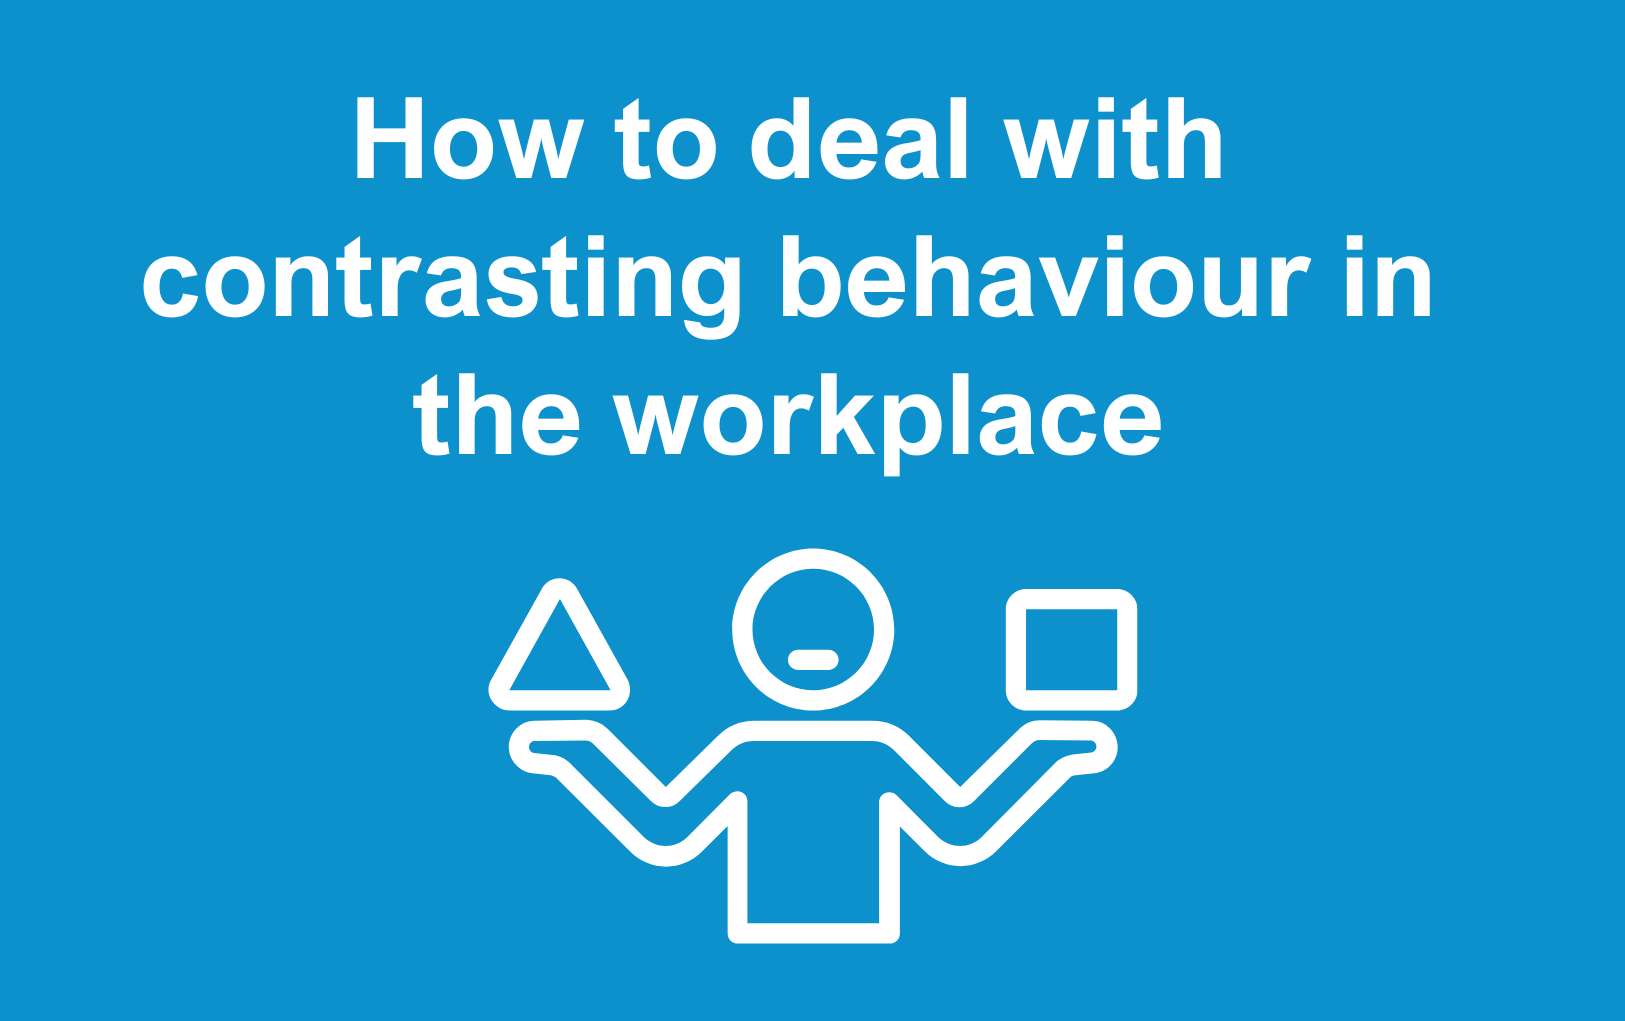 How to deal with contrasting behaviour in the workplace